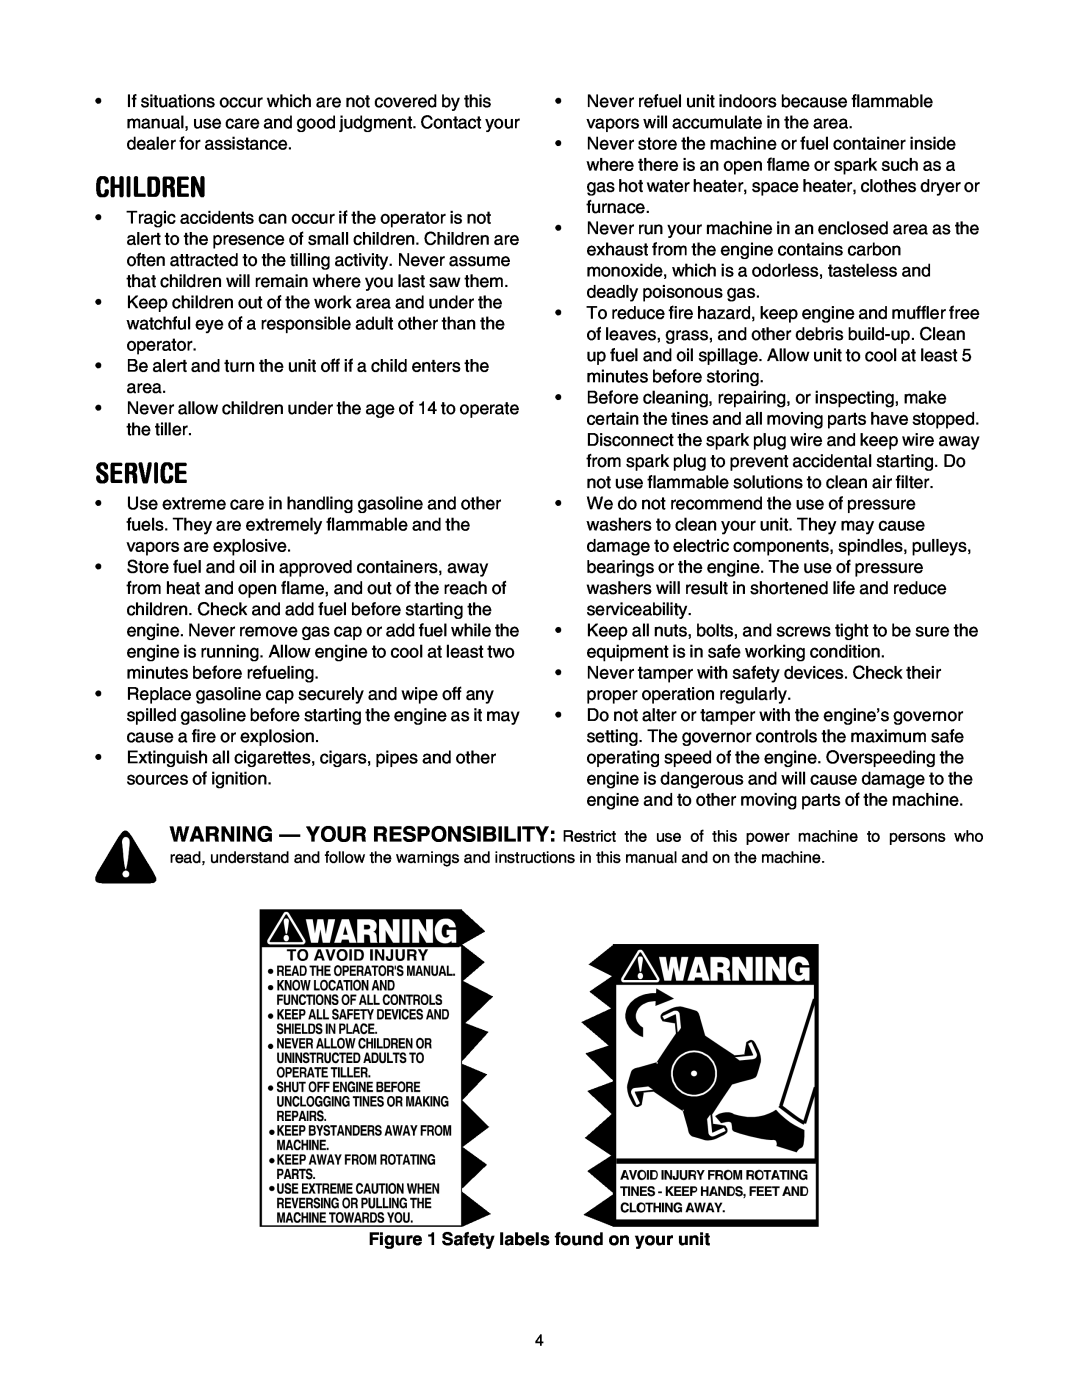 Yard-Man RT65 manual Children, Service, Safety labels found on your unit 